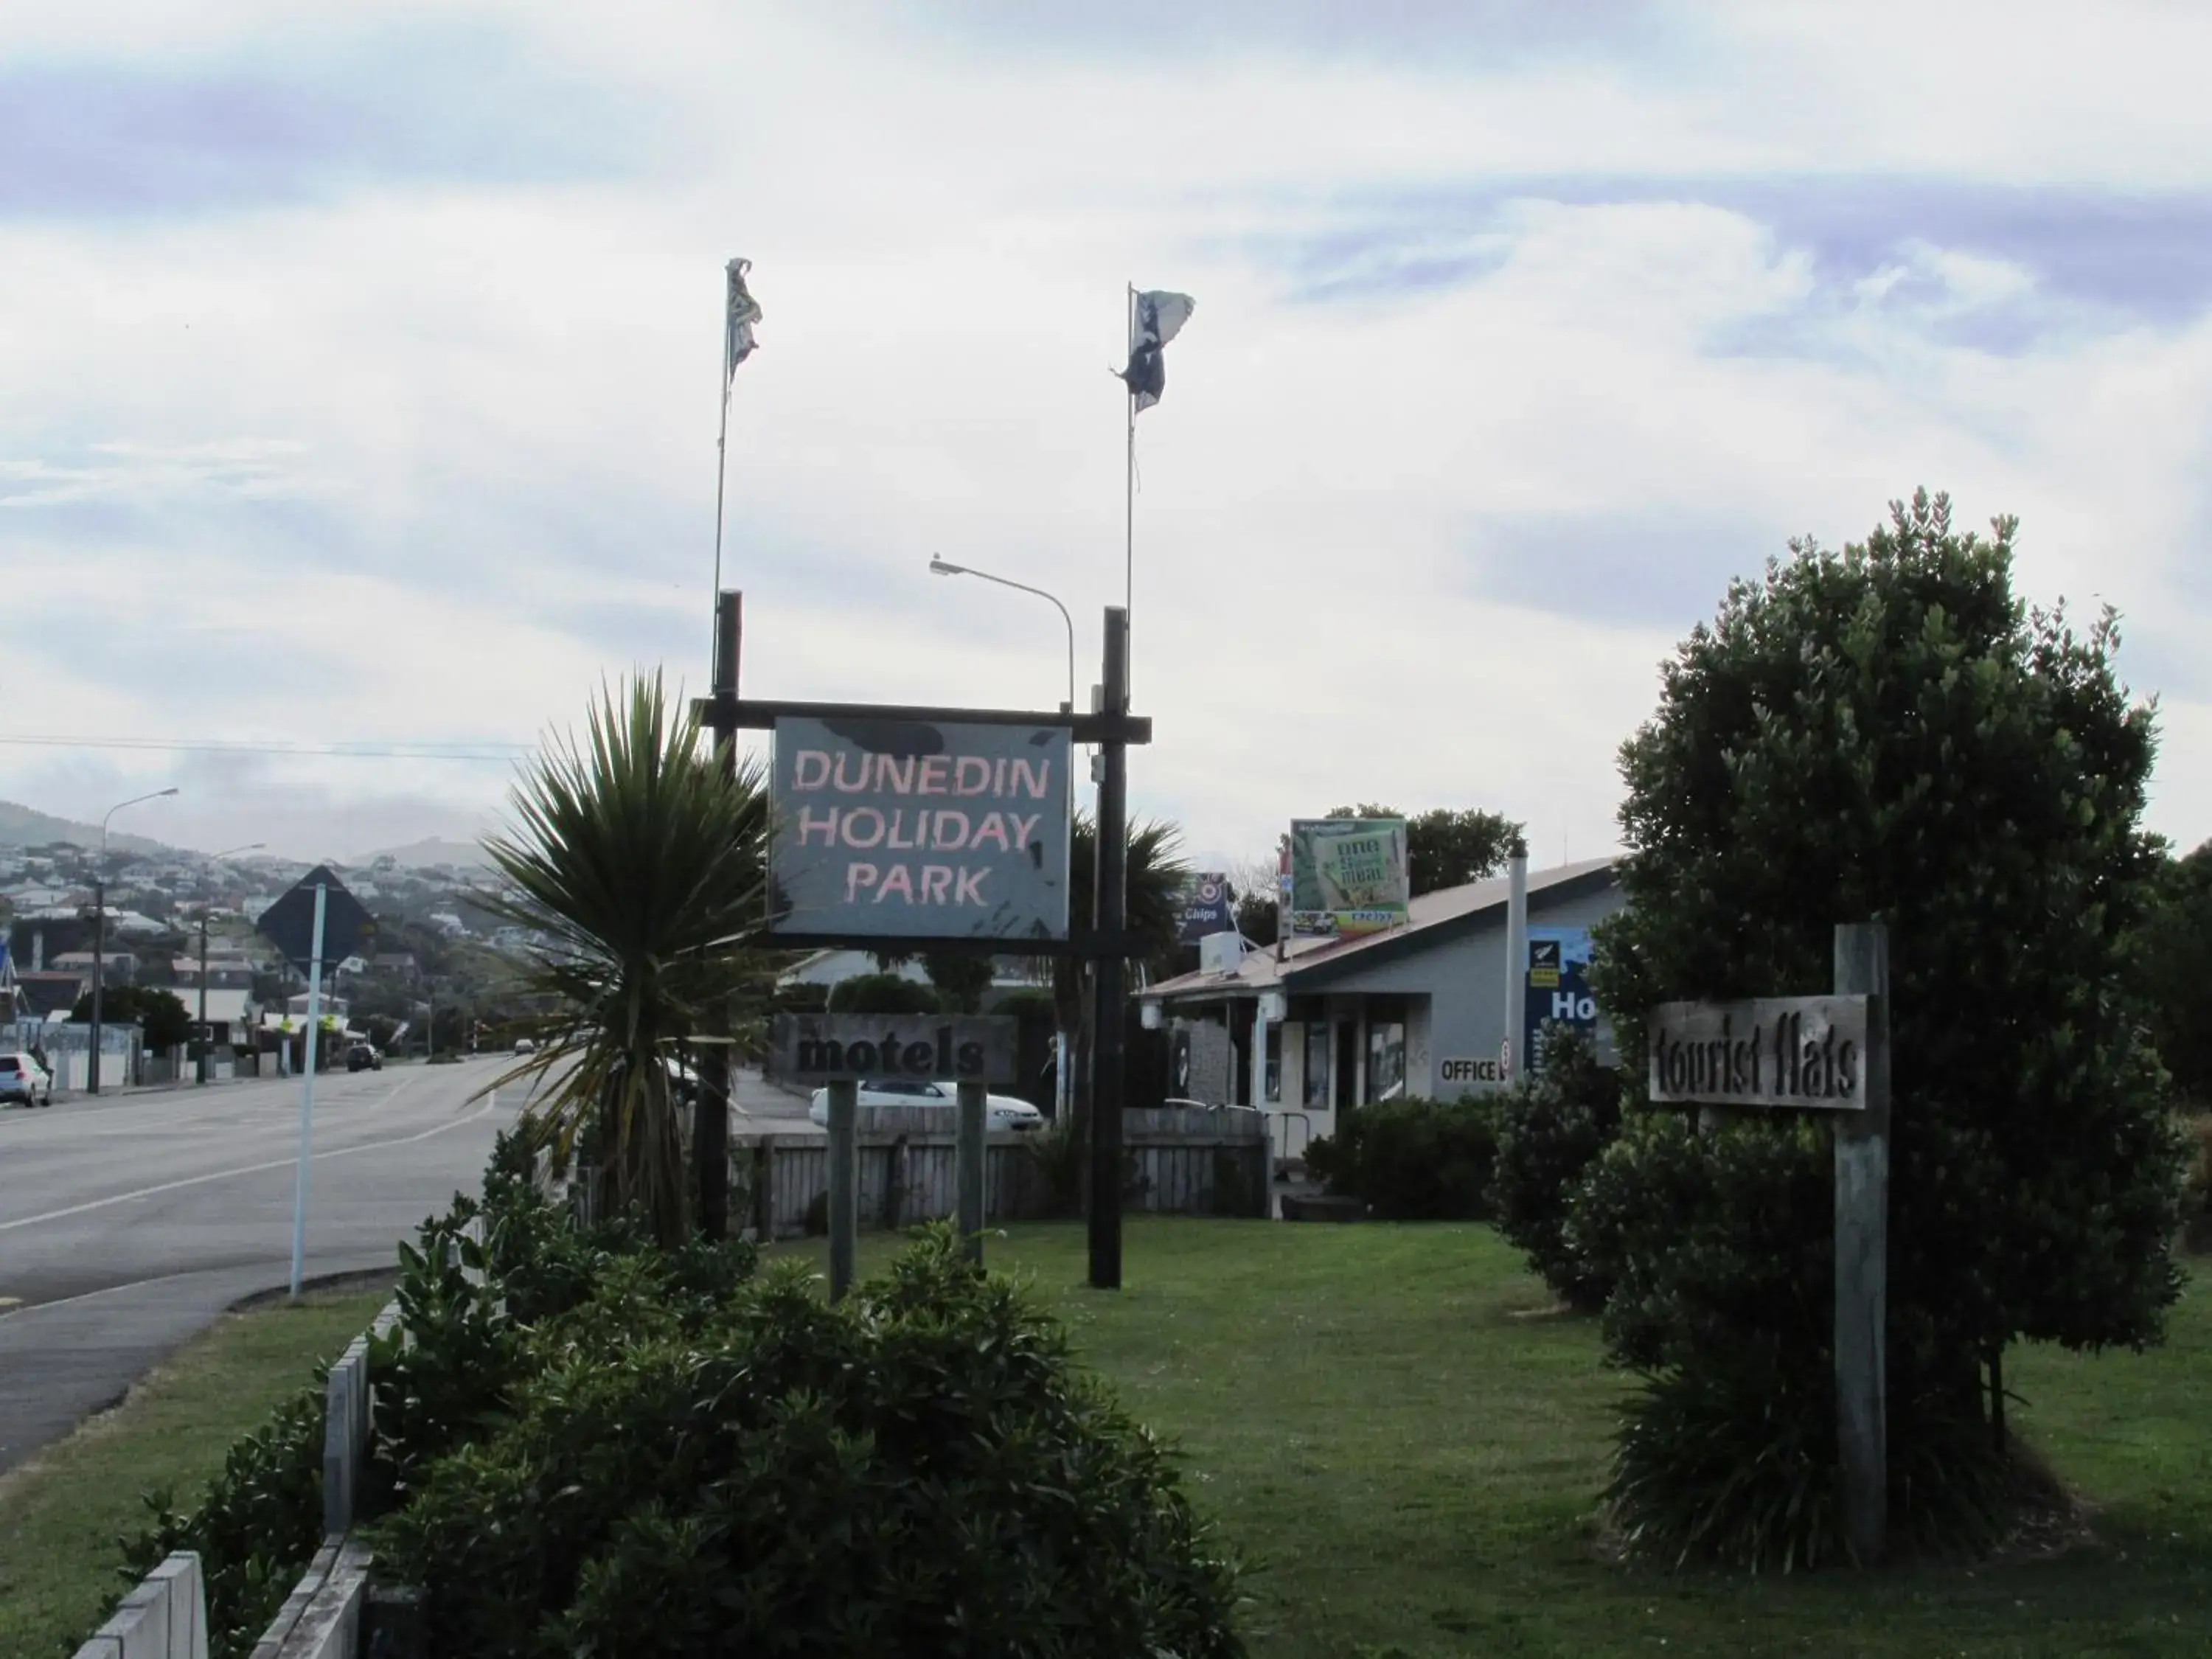 Property logo or sign, Property Building in Dunedin Holiday Park